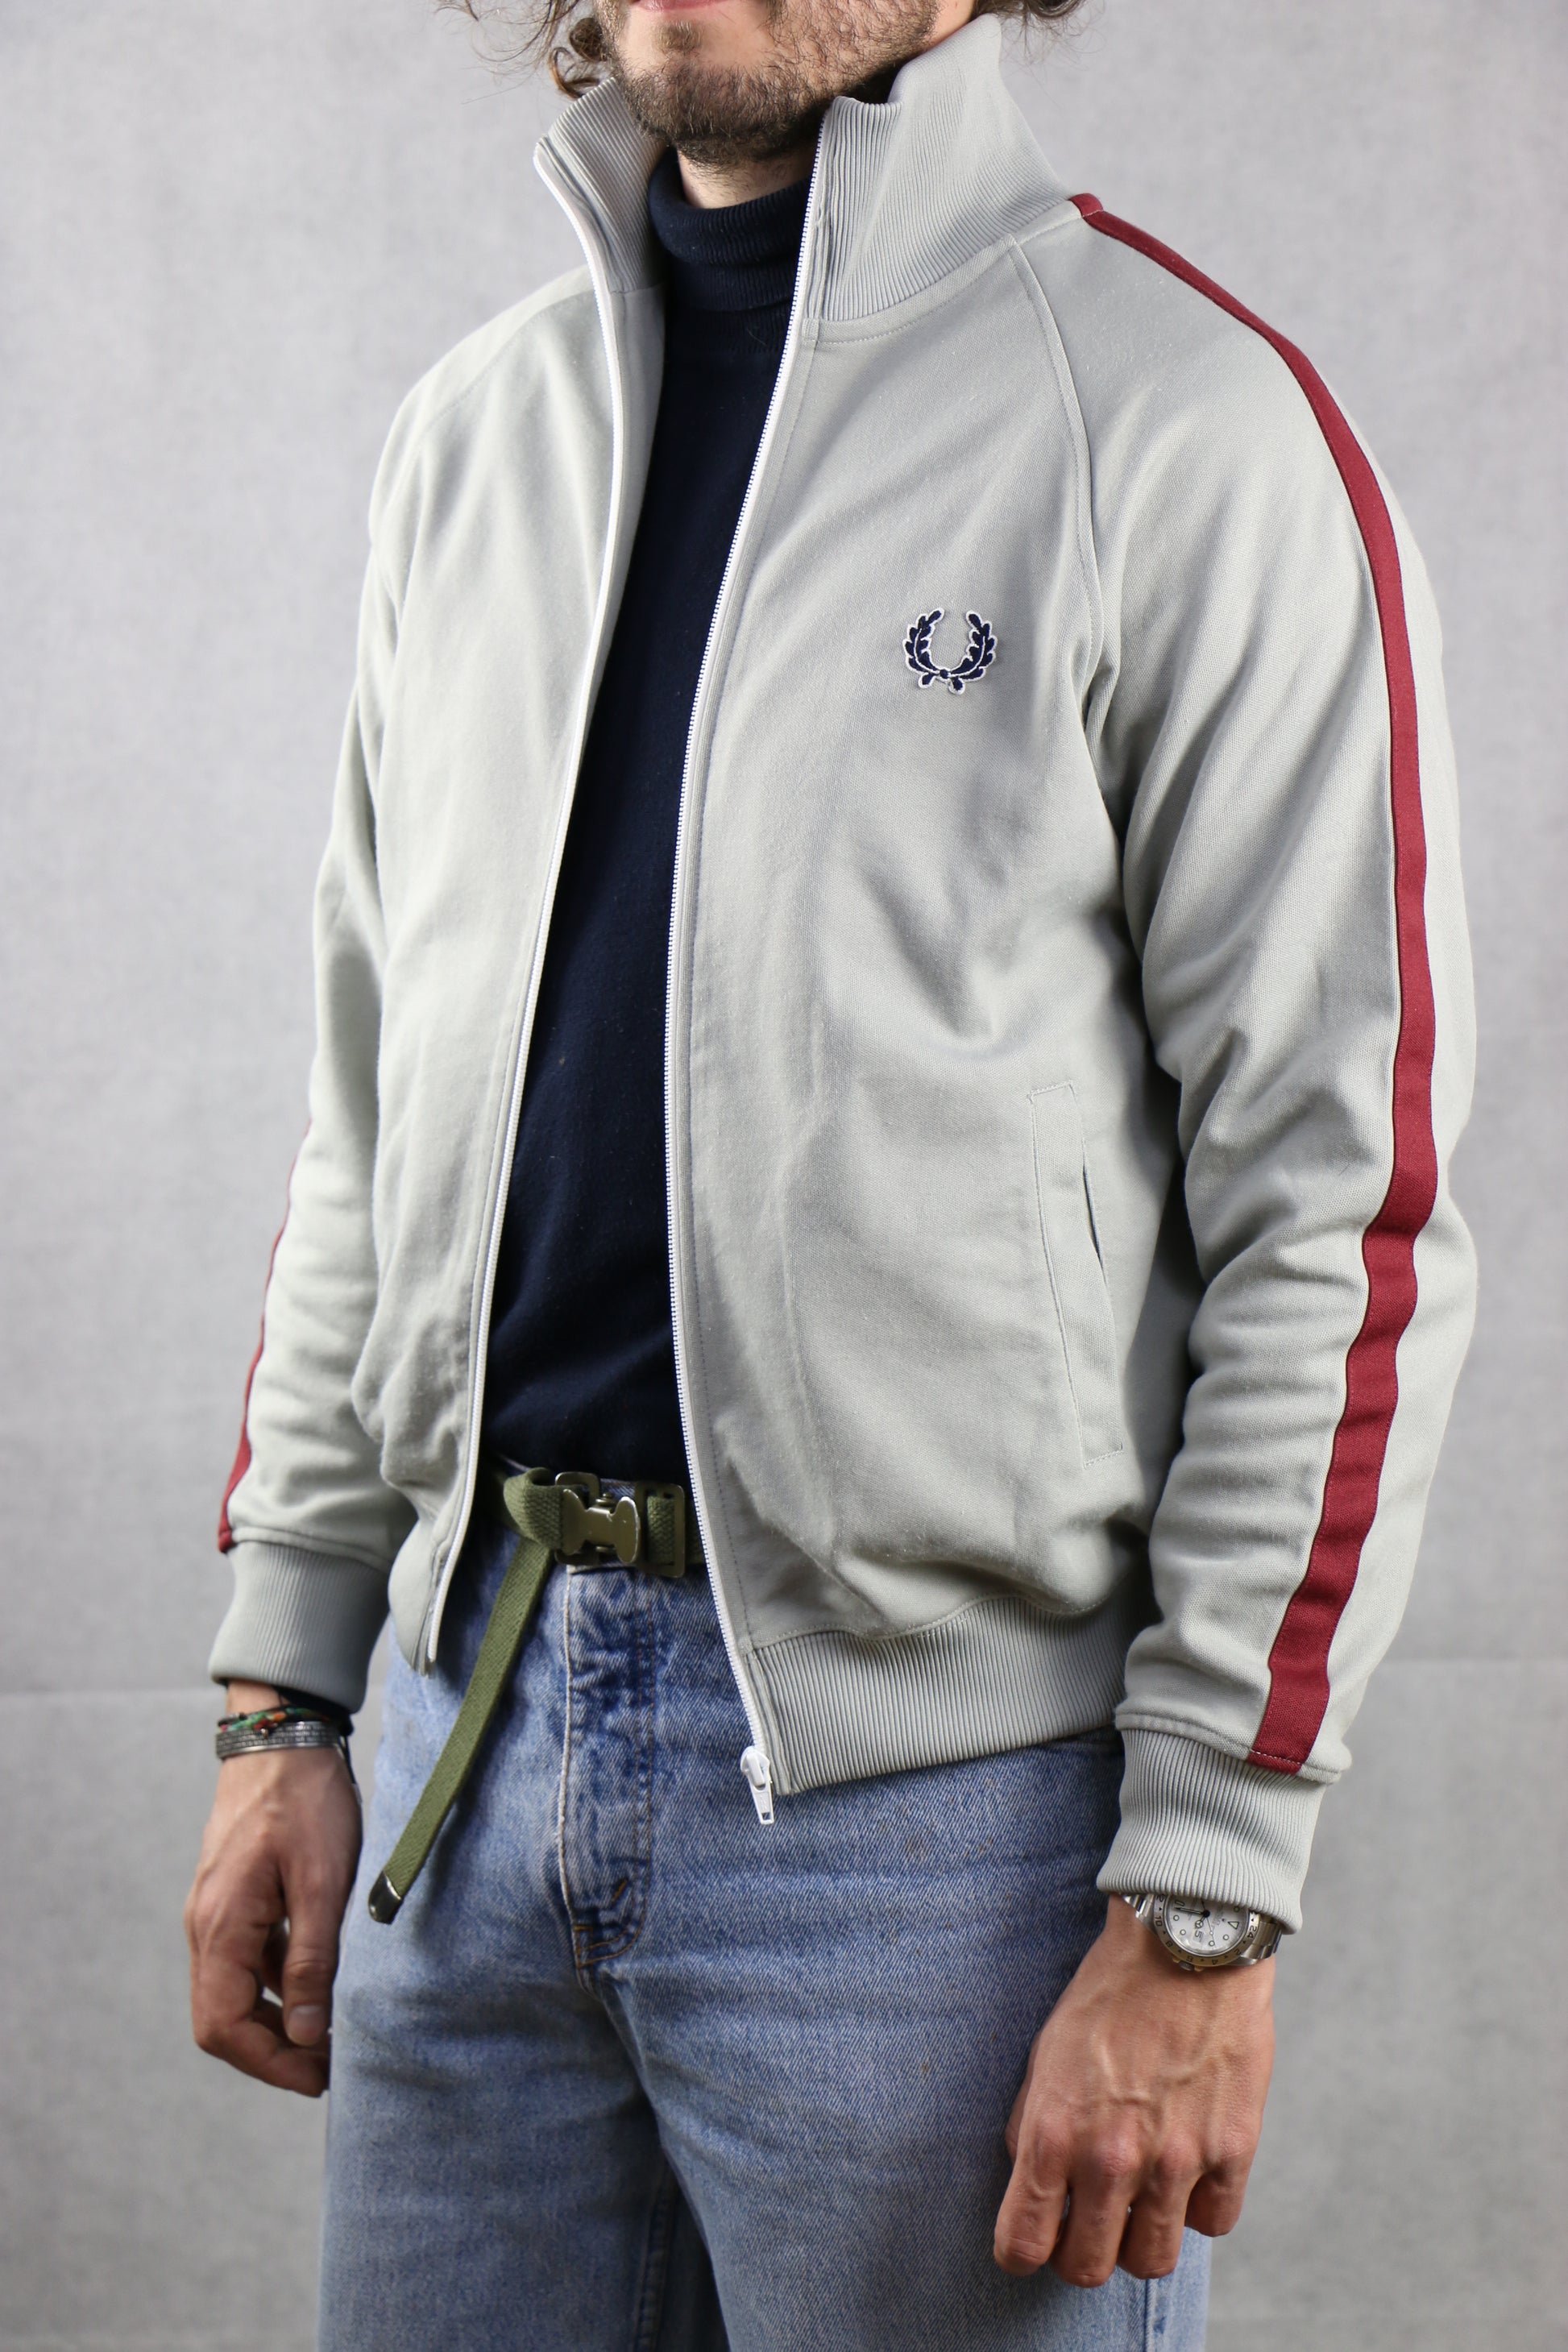 Fred Perry Track Jacket - vintage clothing clochard92.com